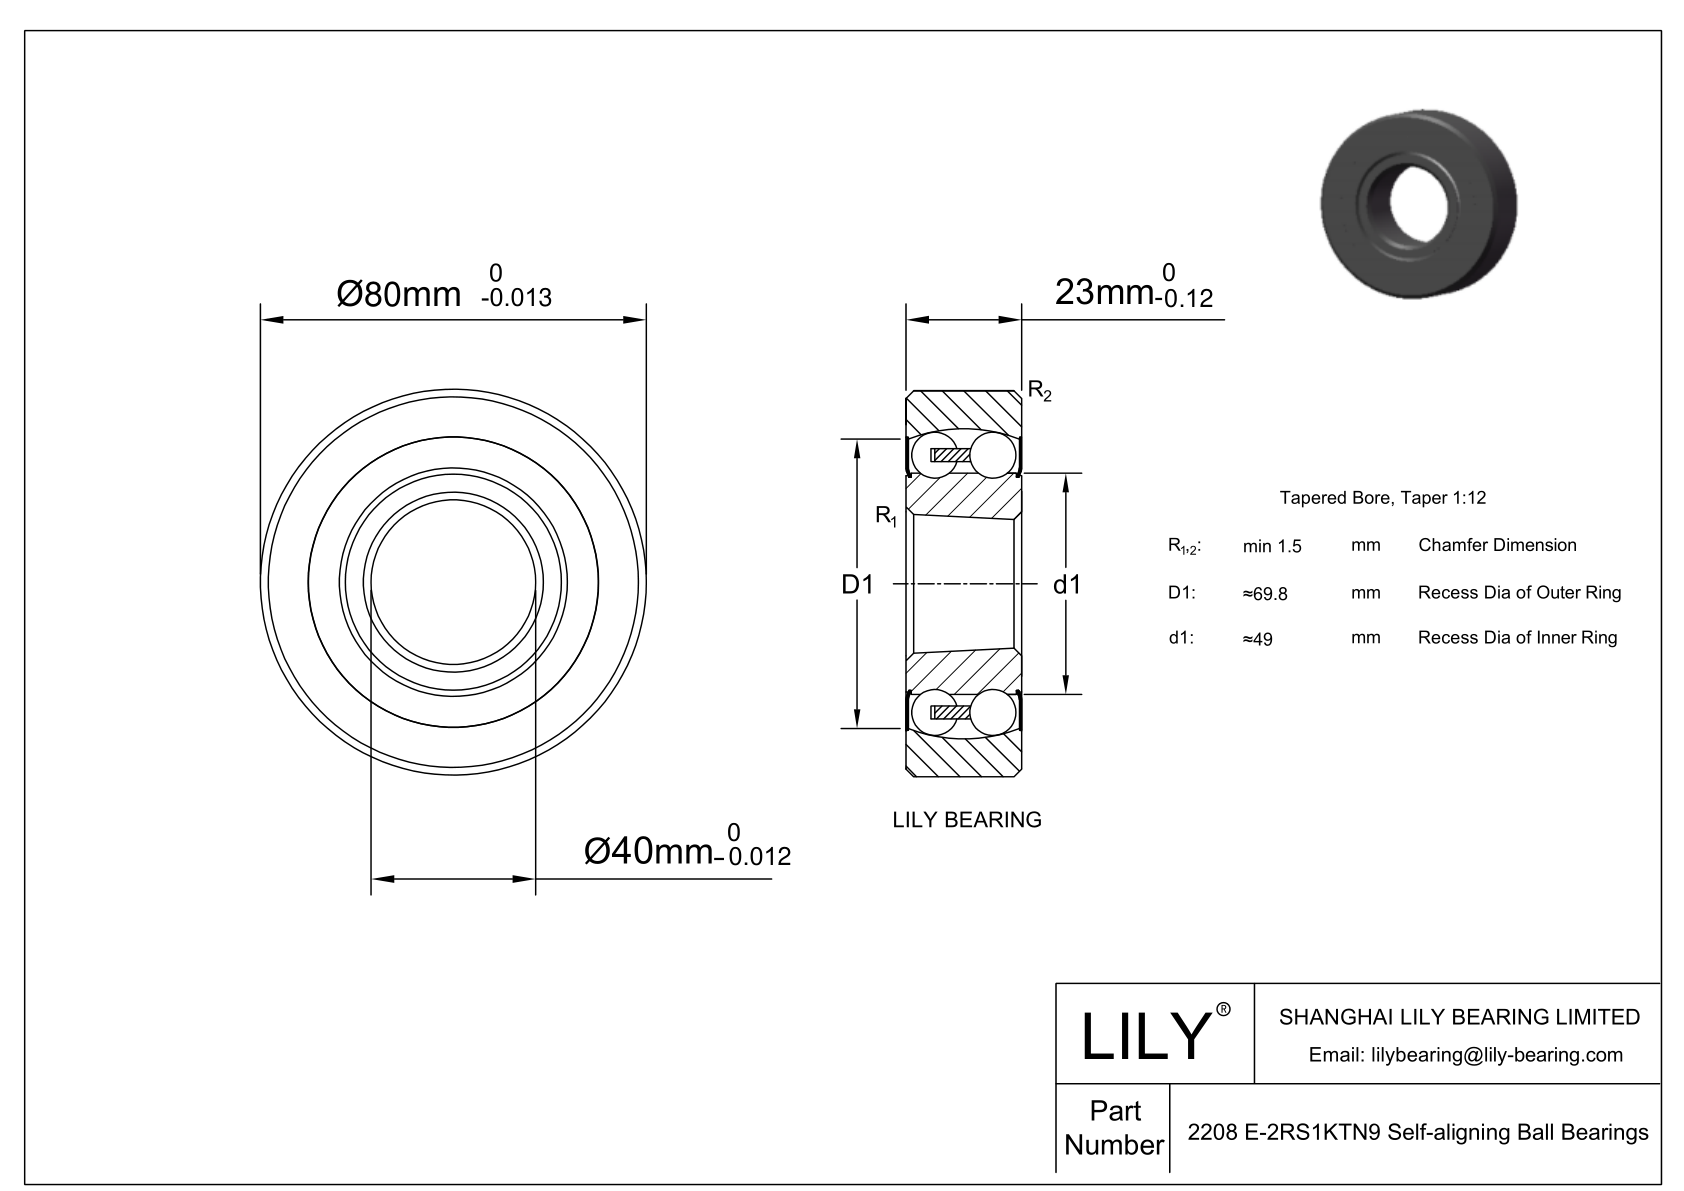 S2208 E-2RS1KTN9 Stainless Steel Self Aligning Ball Bearings cad drawing